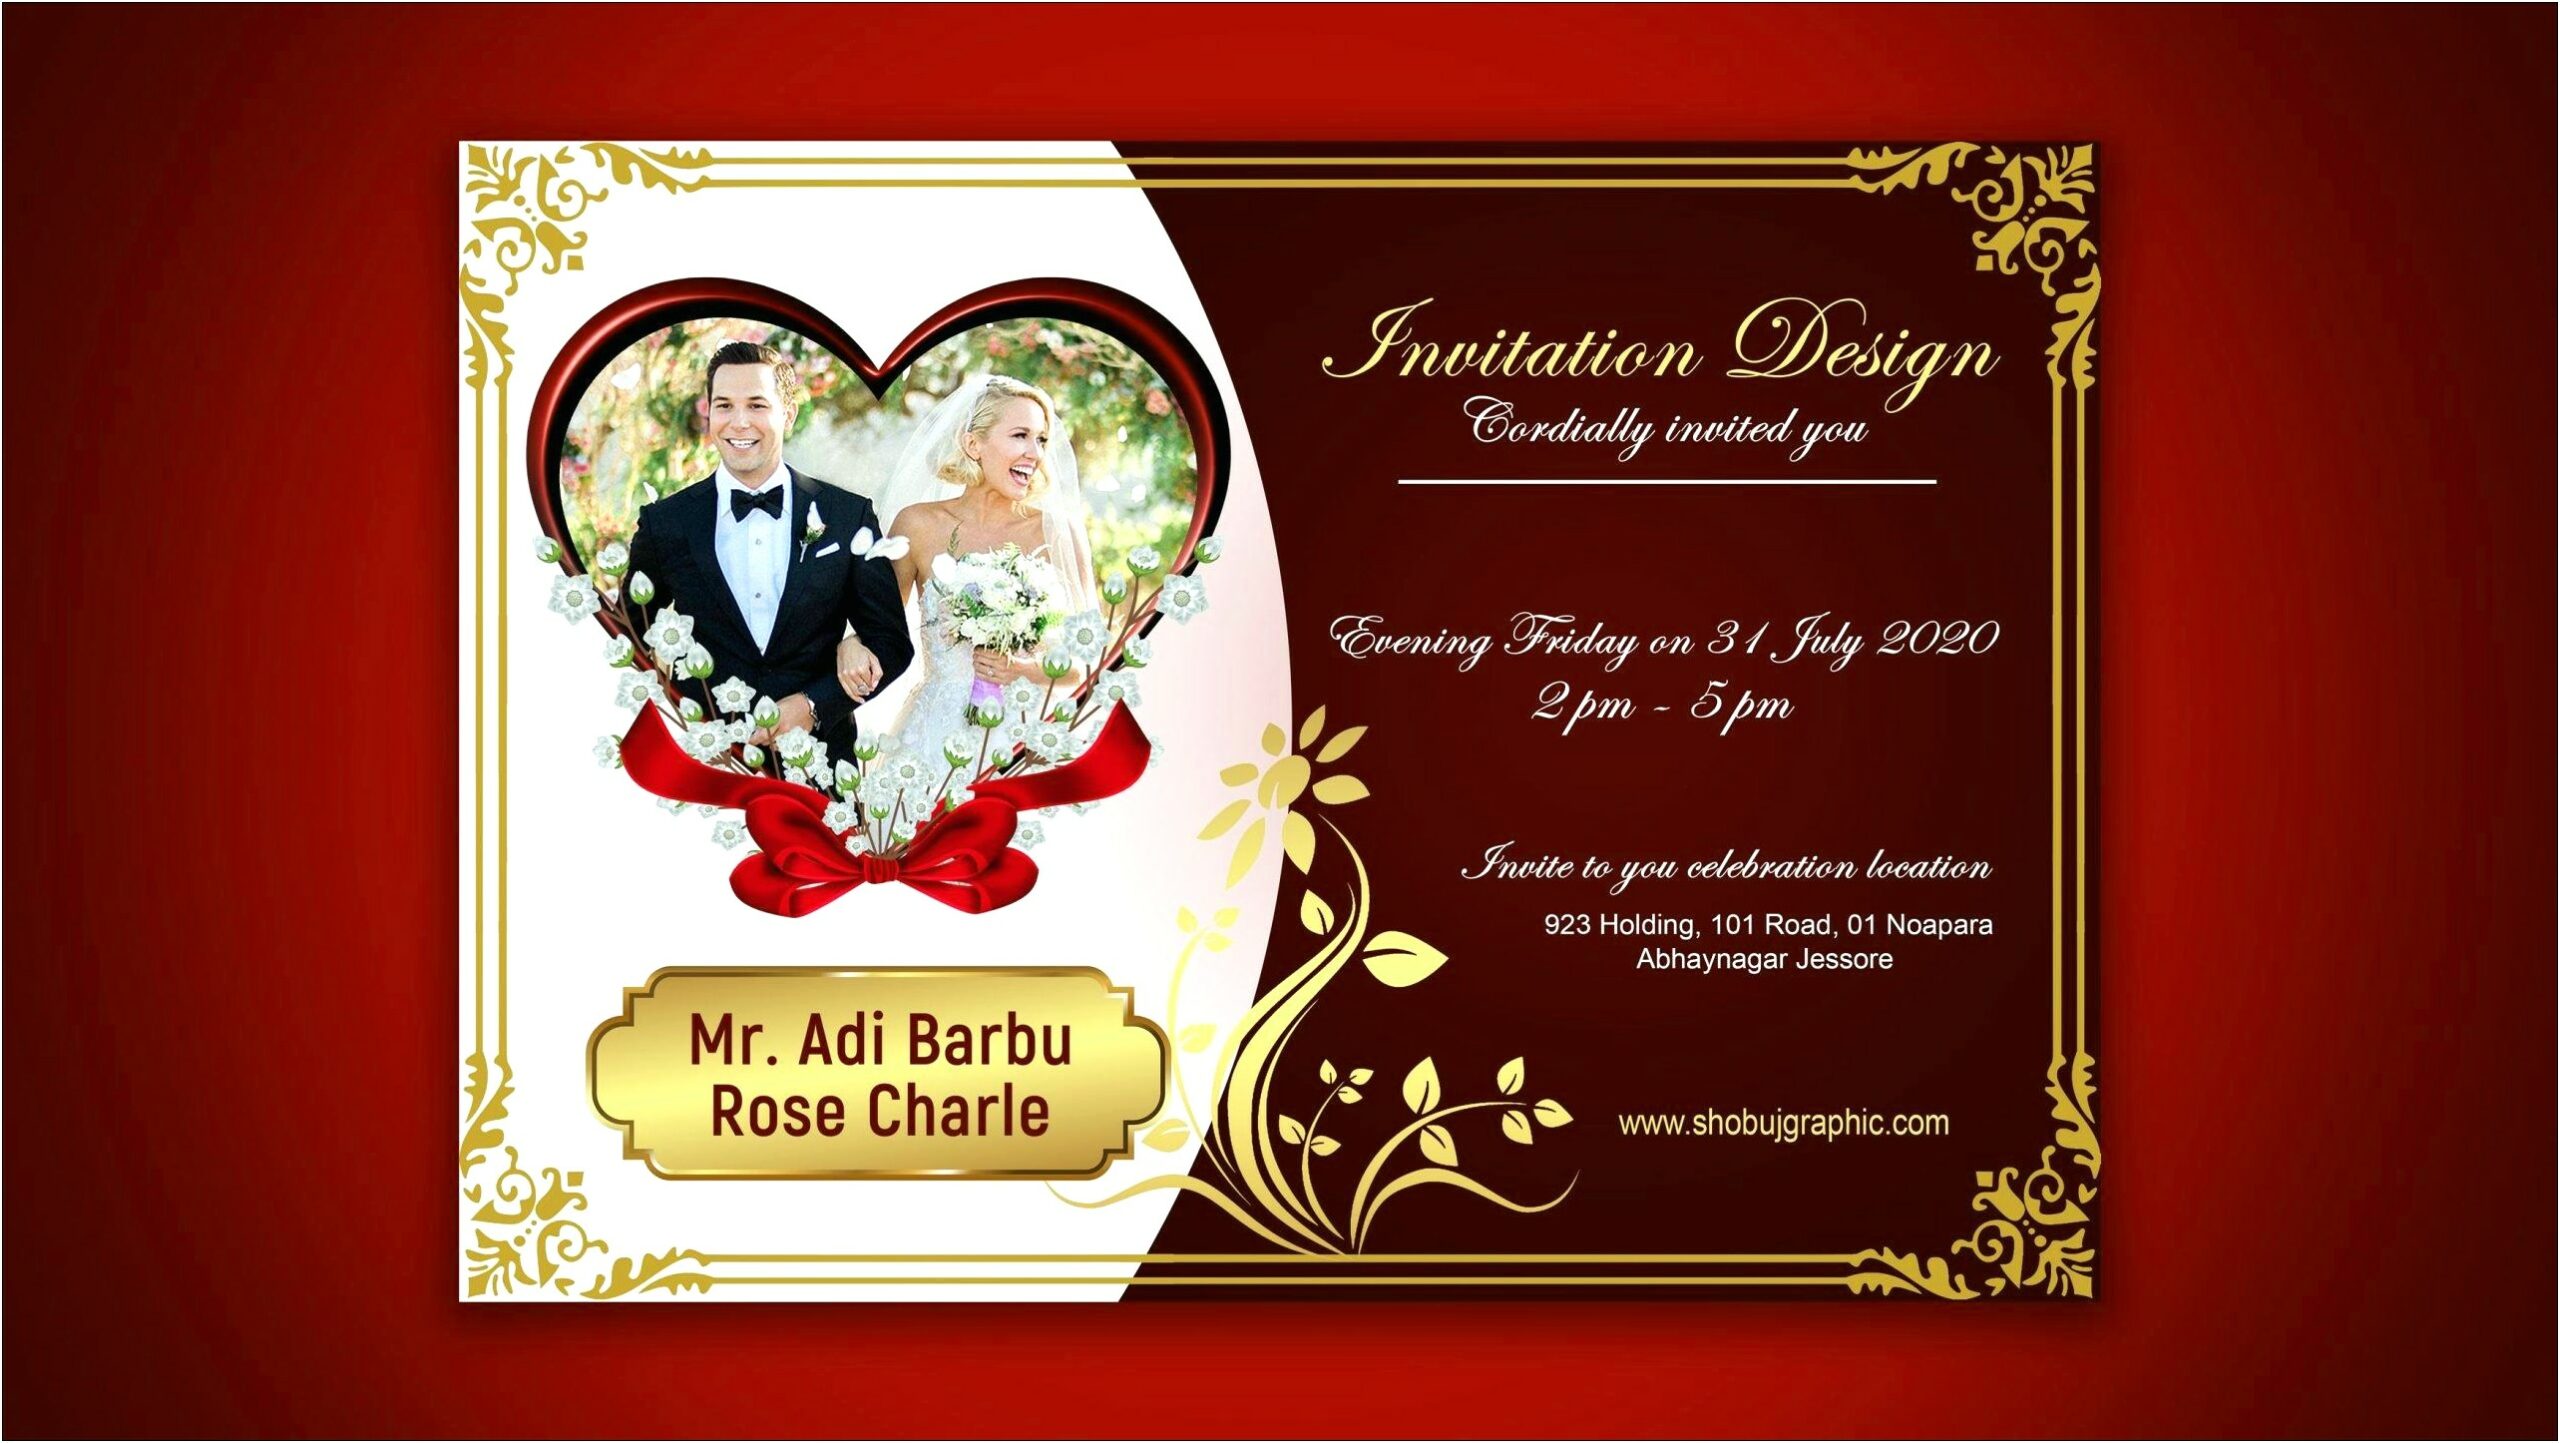 Create Your Own Wedding Invitations In Photoshop